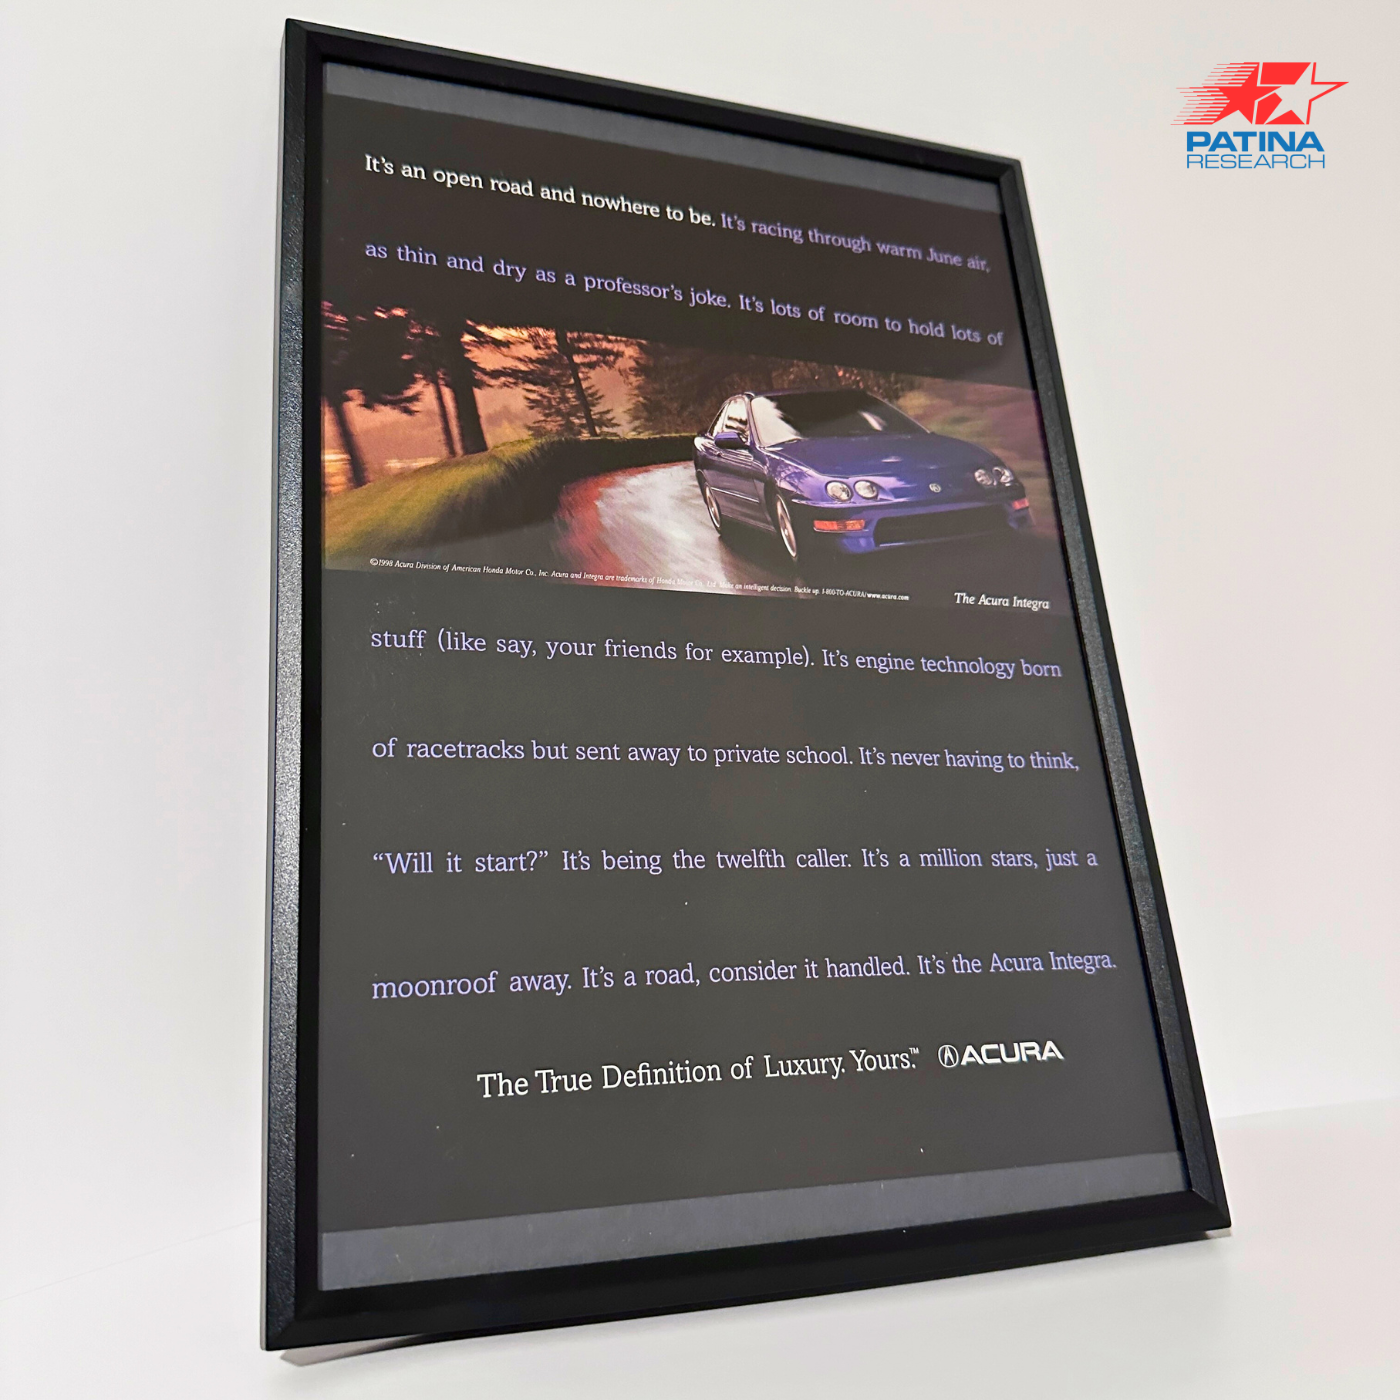 Porsche 997 one in a series of one framed ad